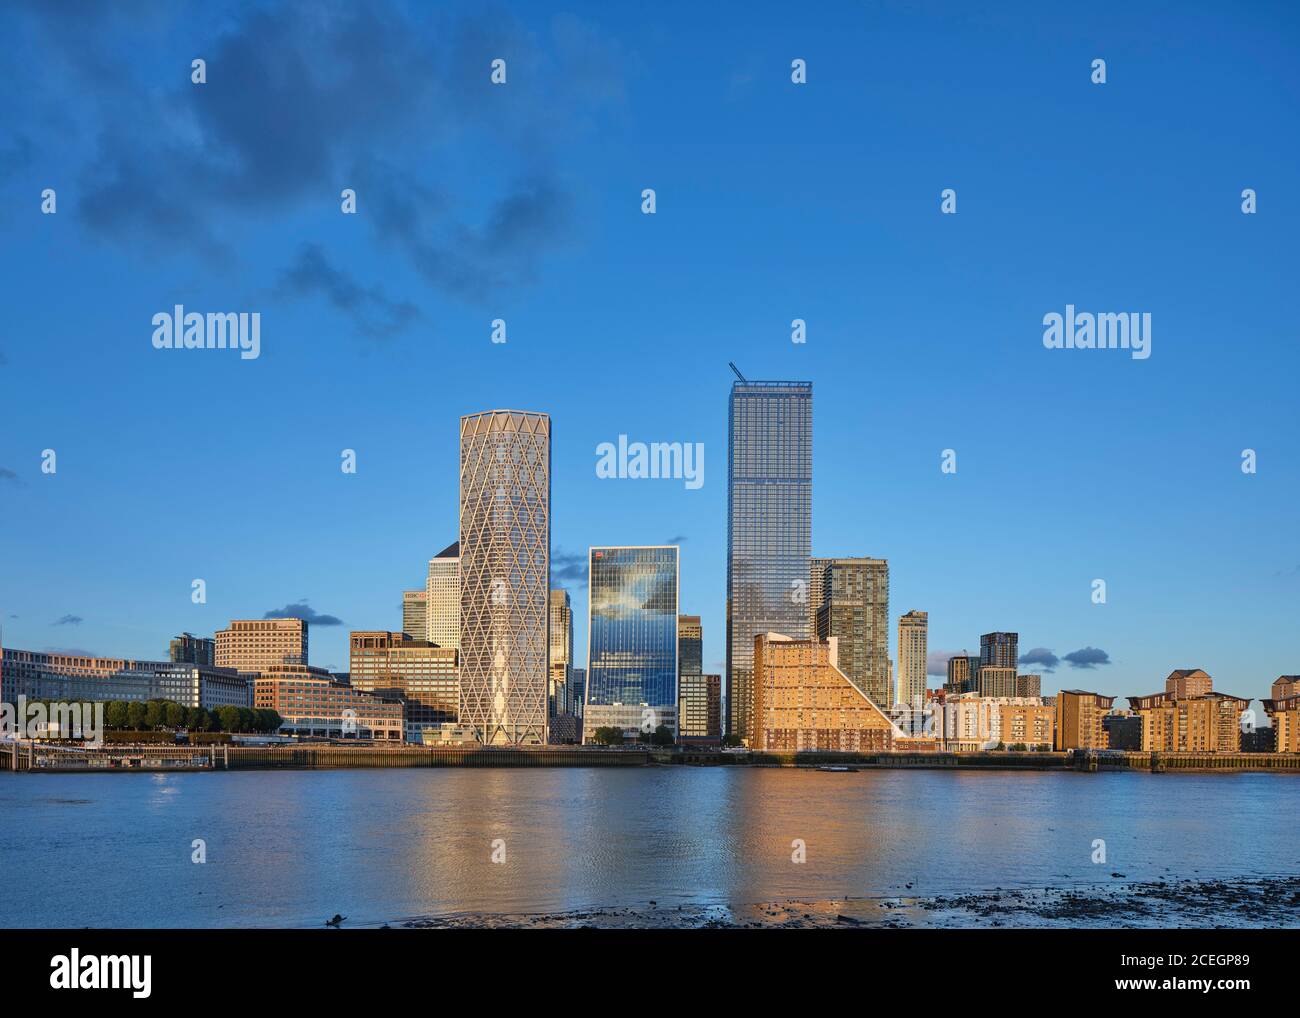 Low tide Thames and Canary Wharf skyline. Newfoundland Tower, London, United Kingdom. Architect: Horden Cherry Lee Architects Ltd, 2020. Stock Photo